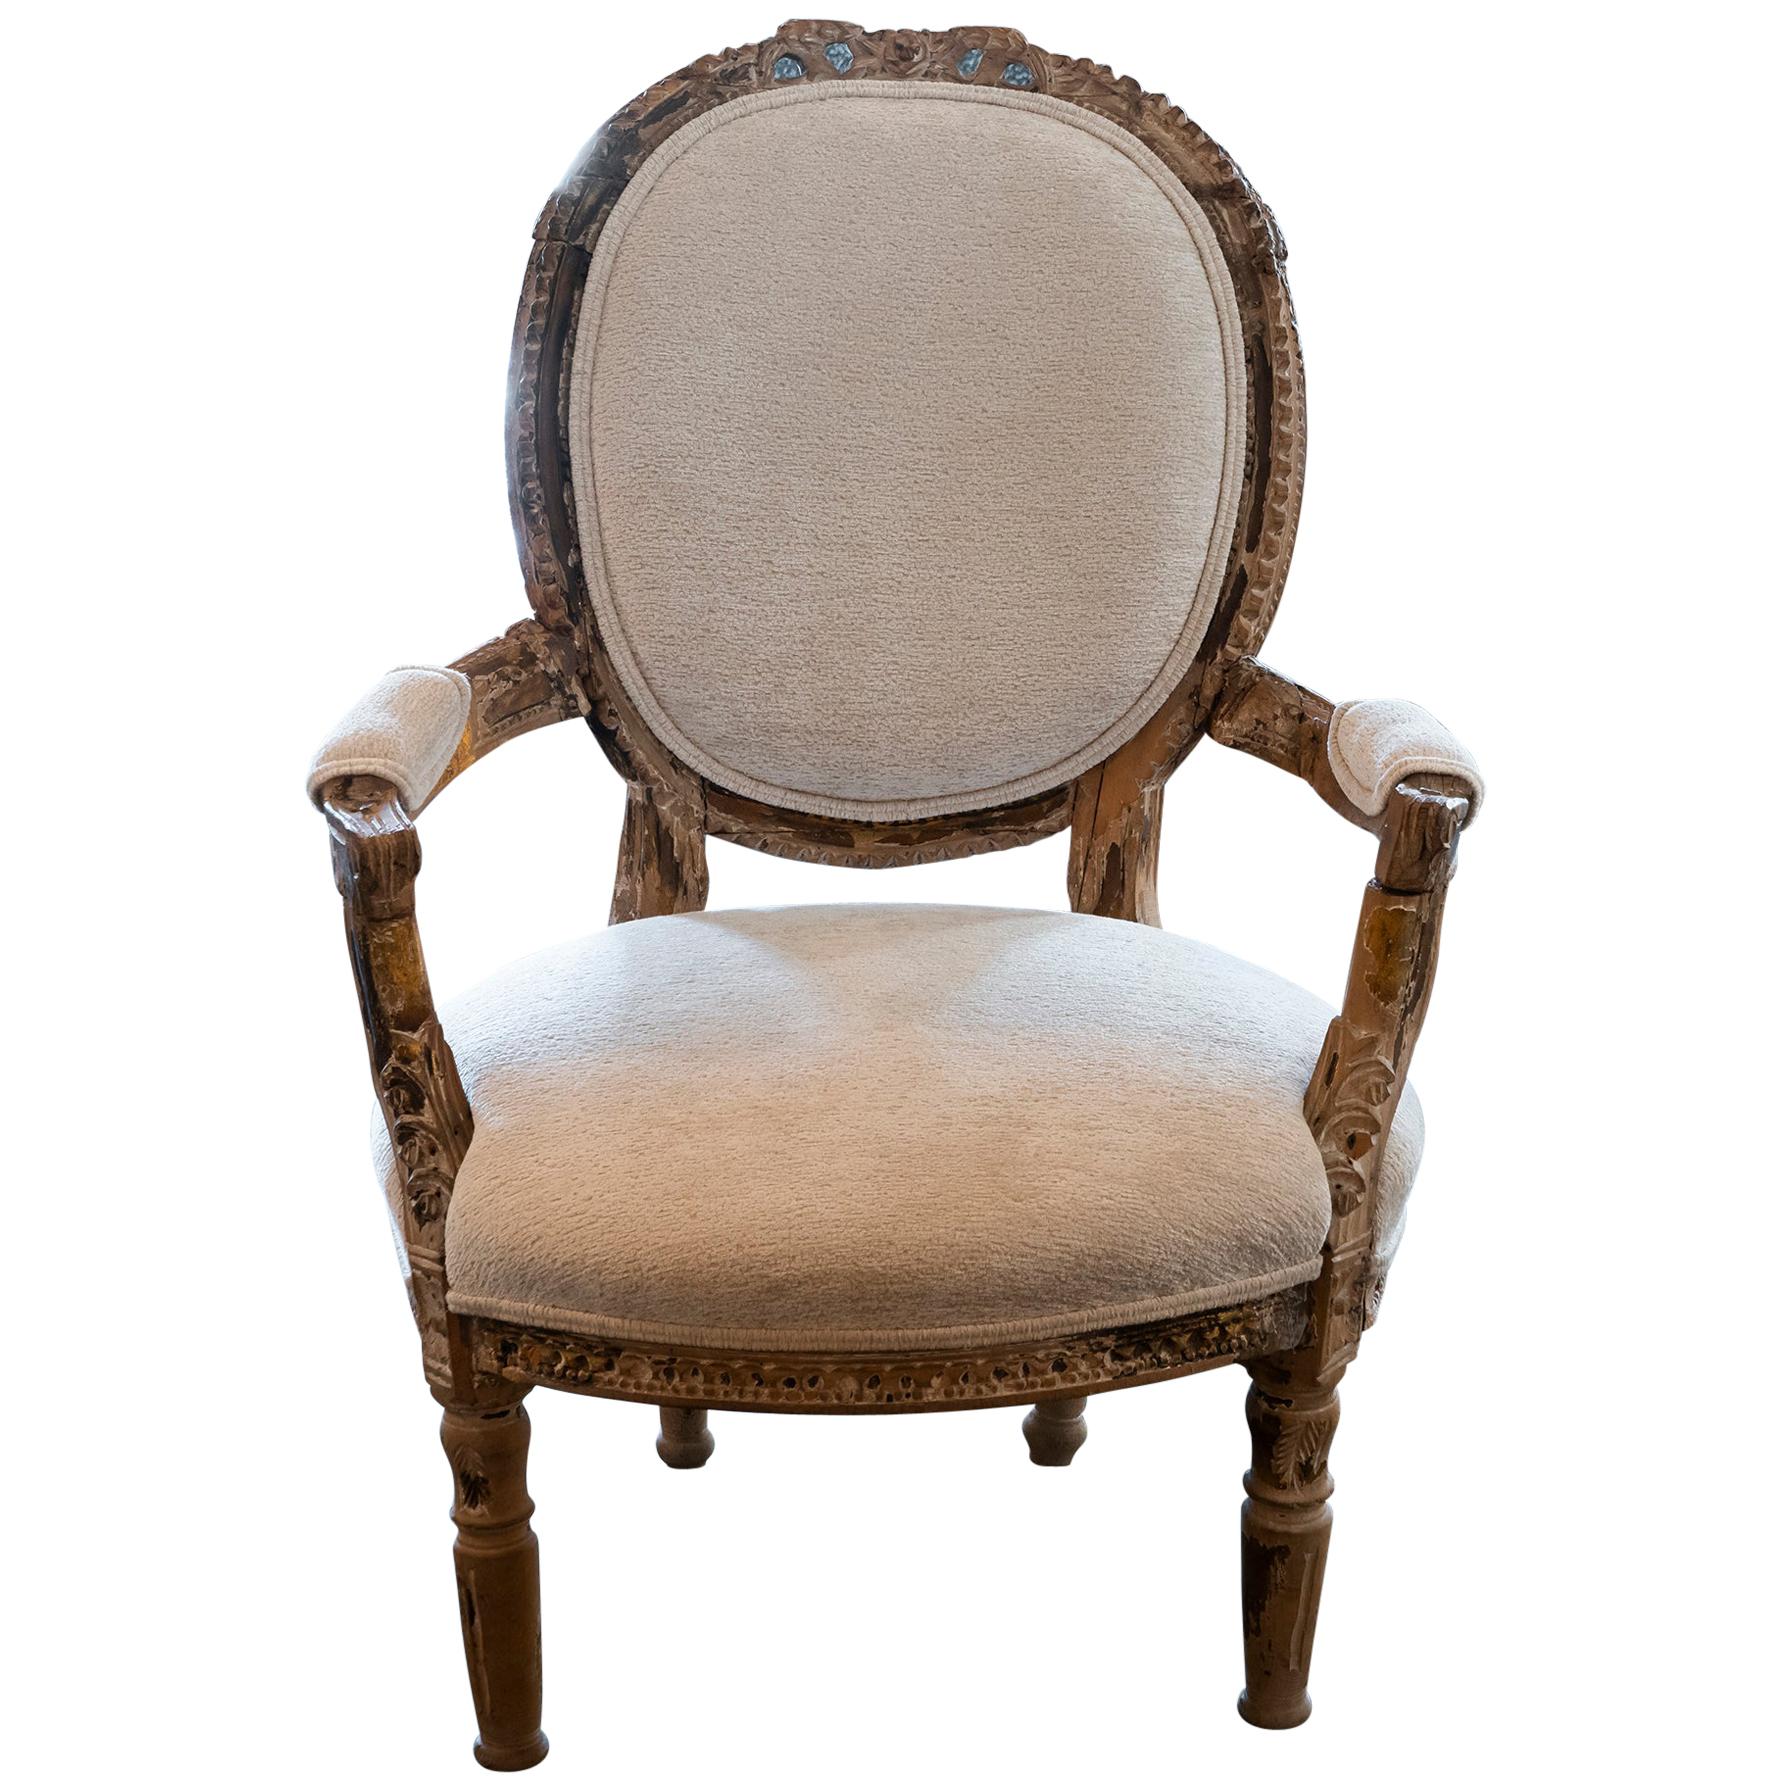 Early 20th Century French Carved Wood Armchair, Reupholstery Ivory Velvet